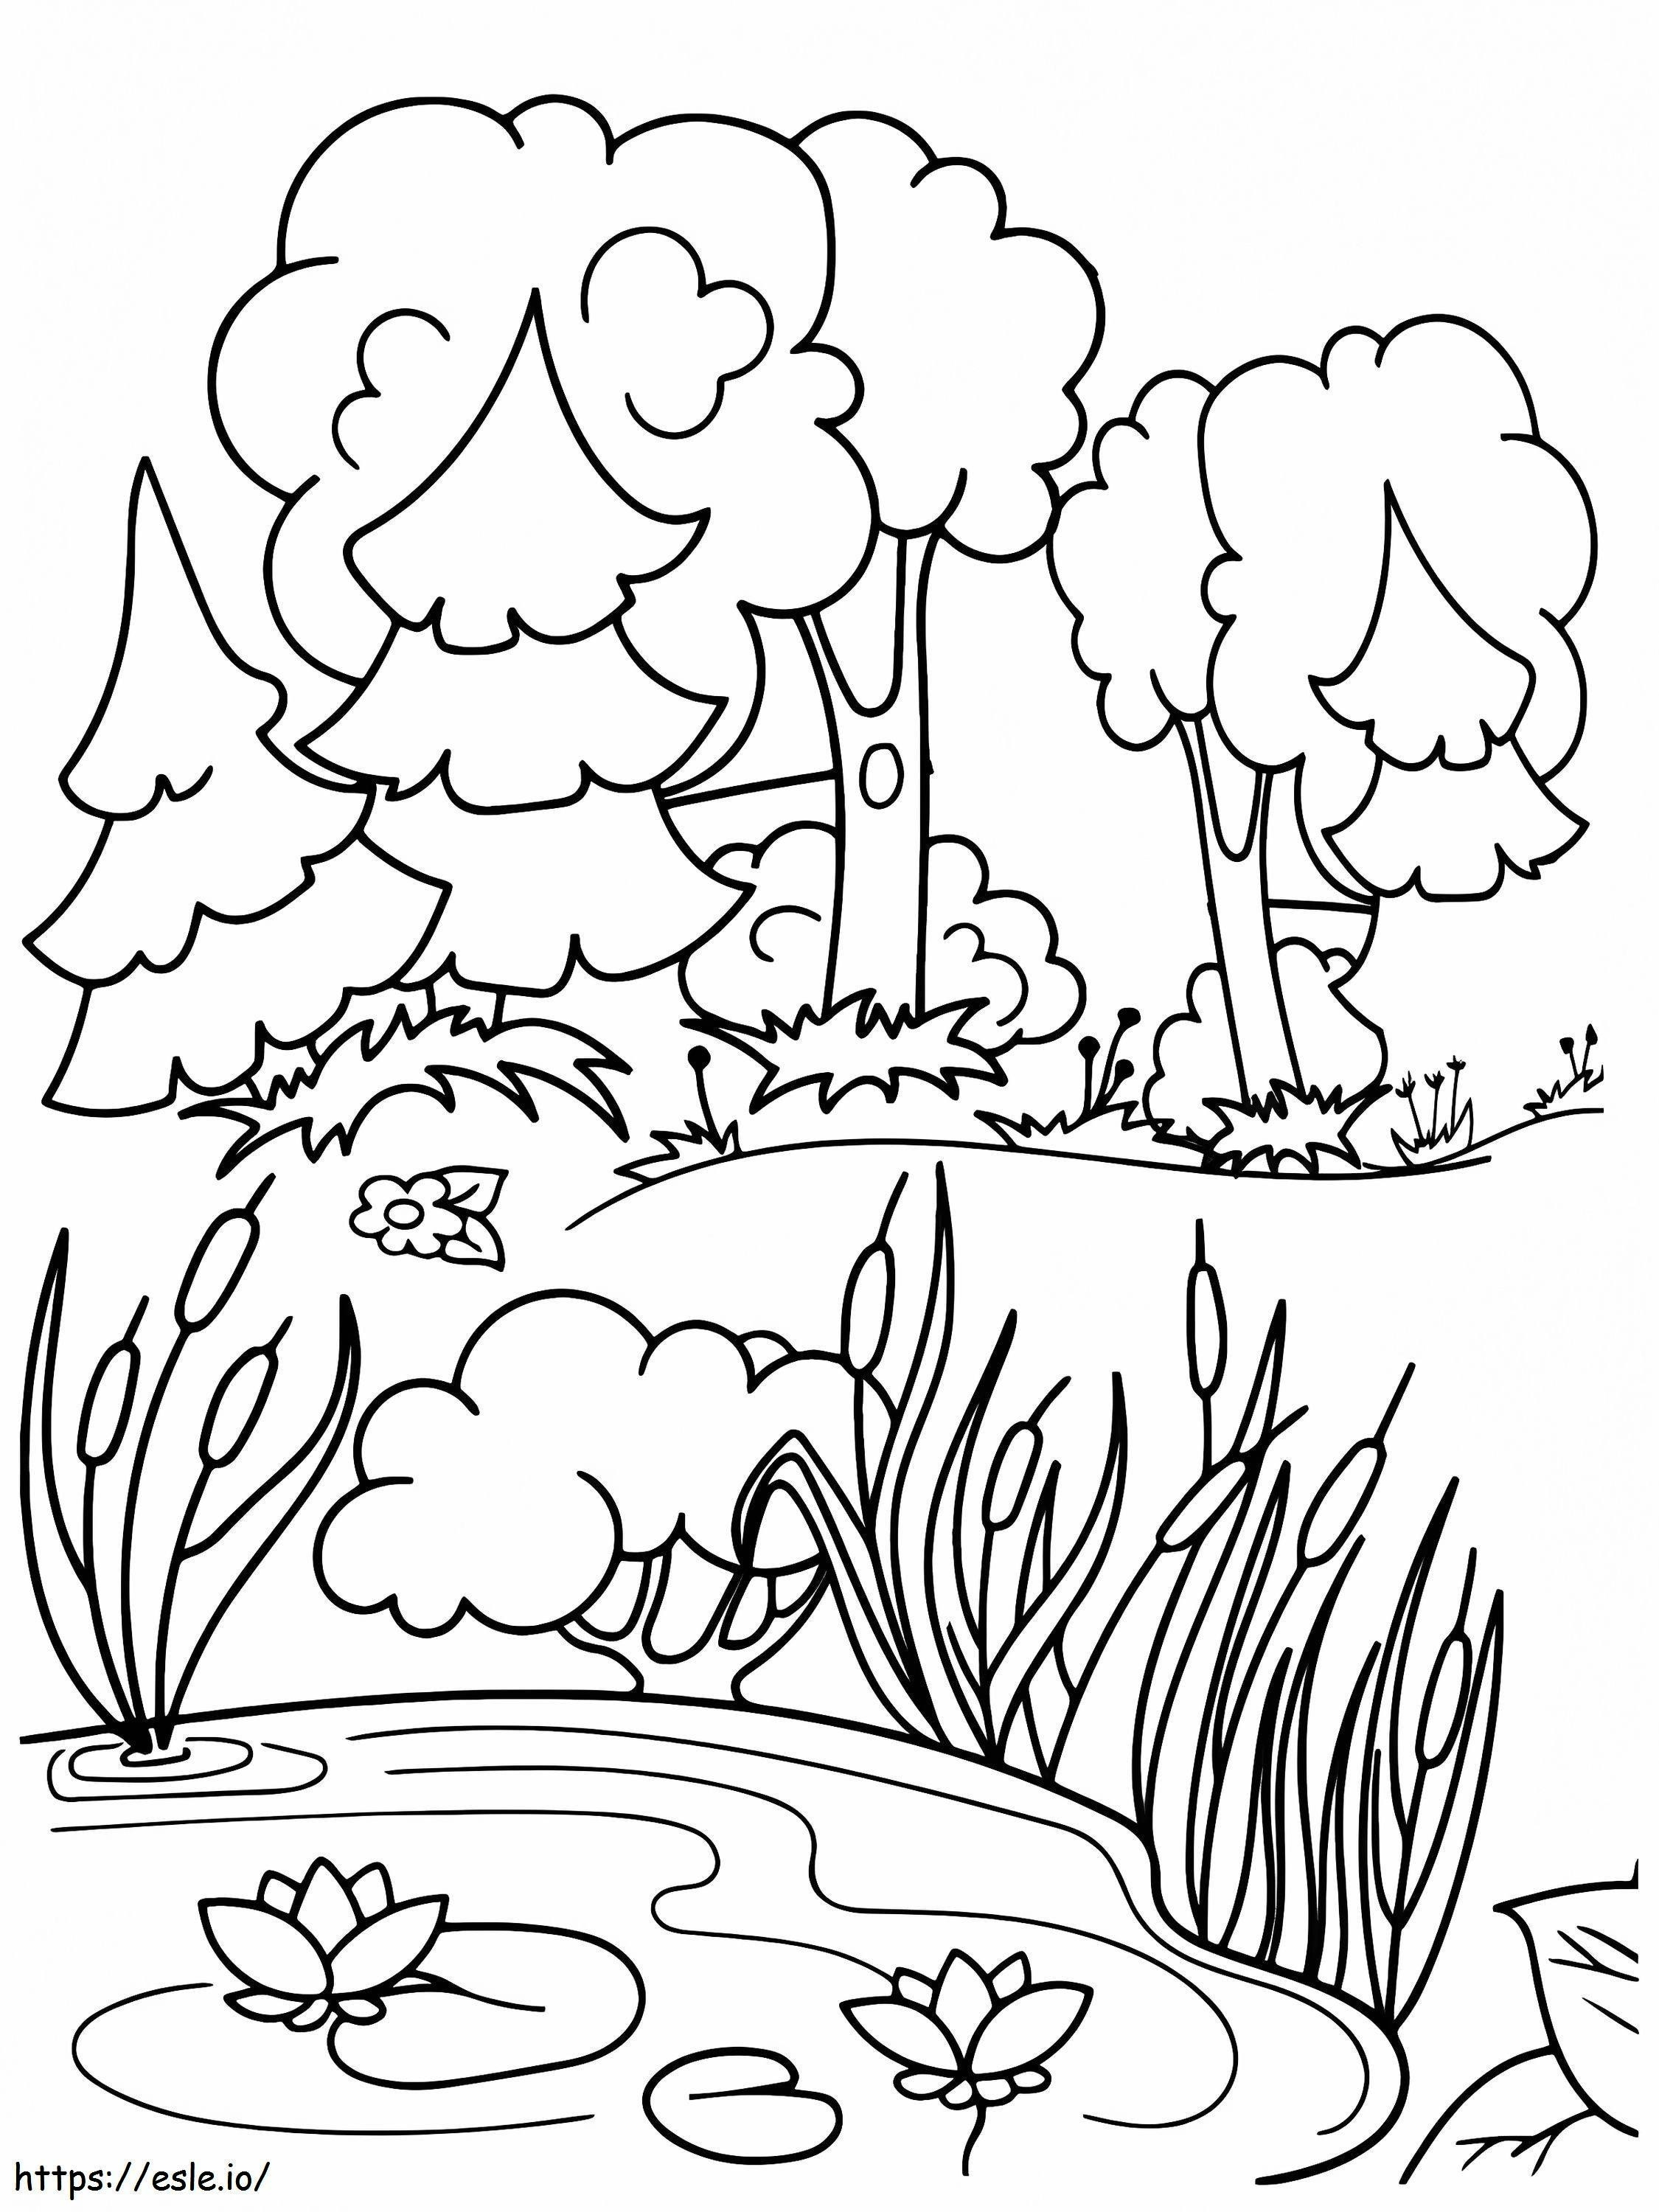 Calm Forest Pond coloring page